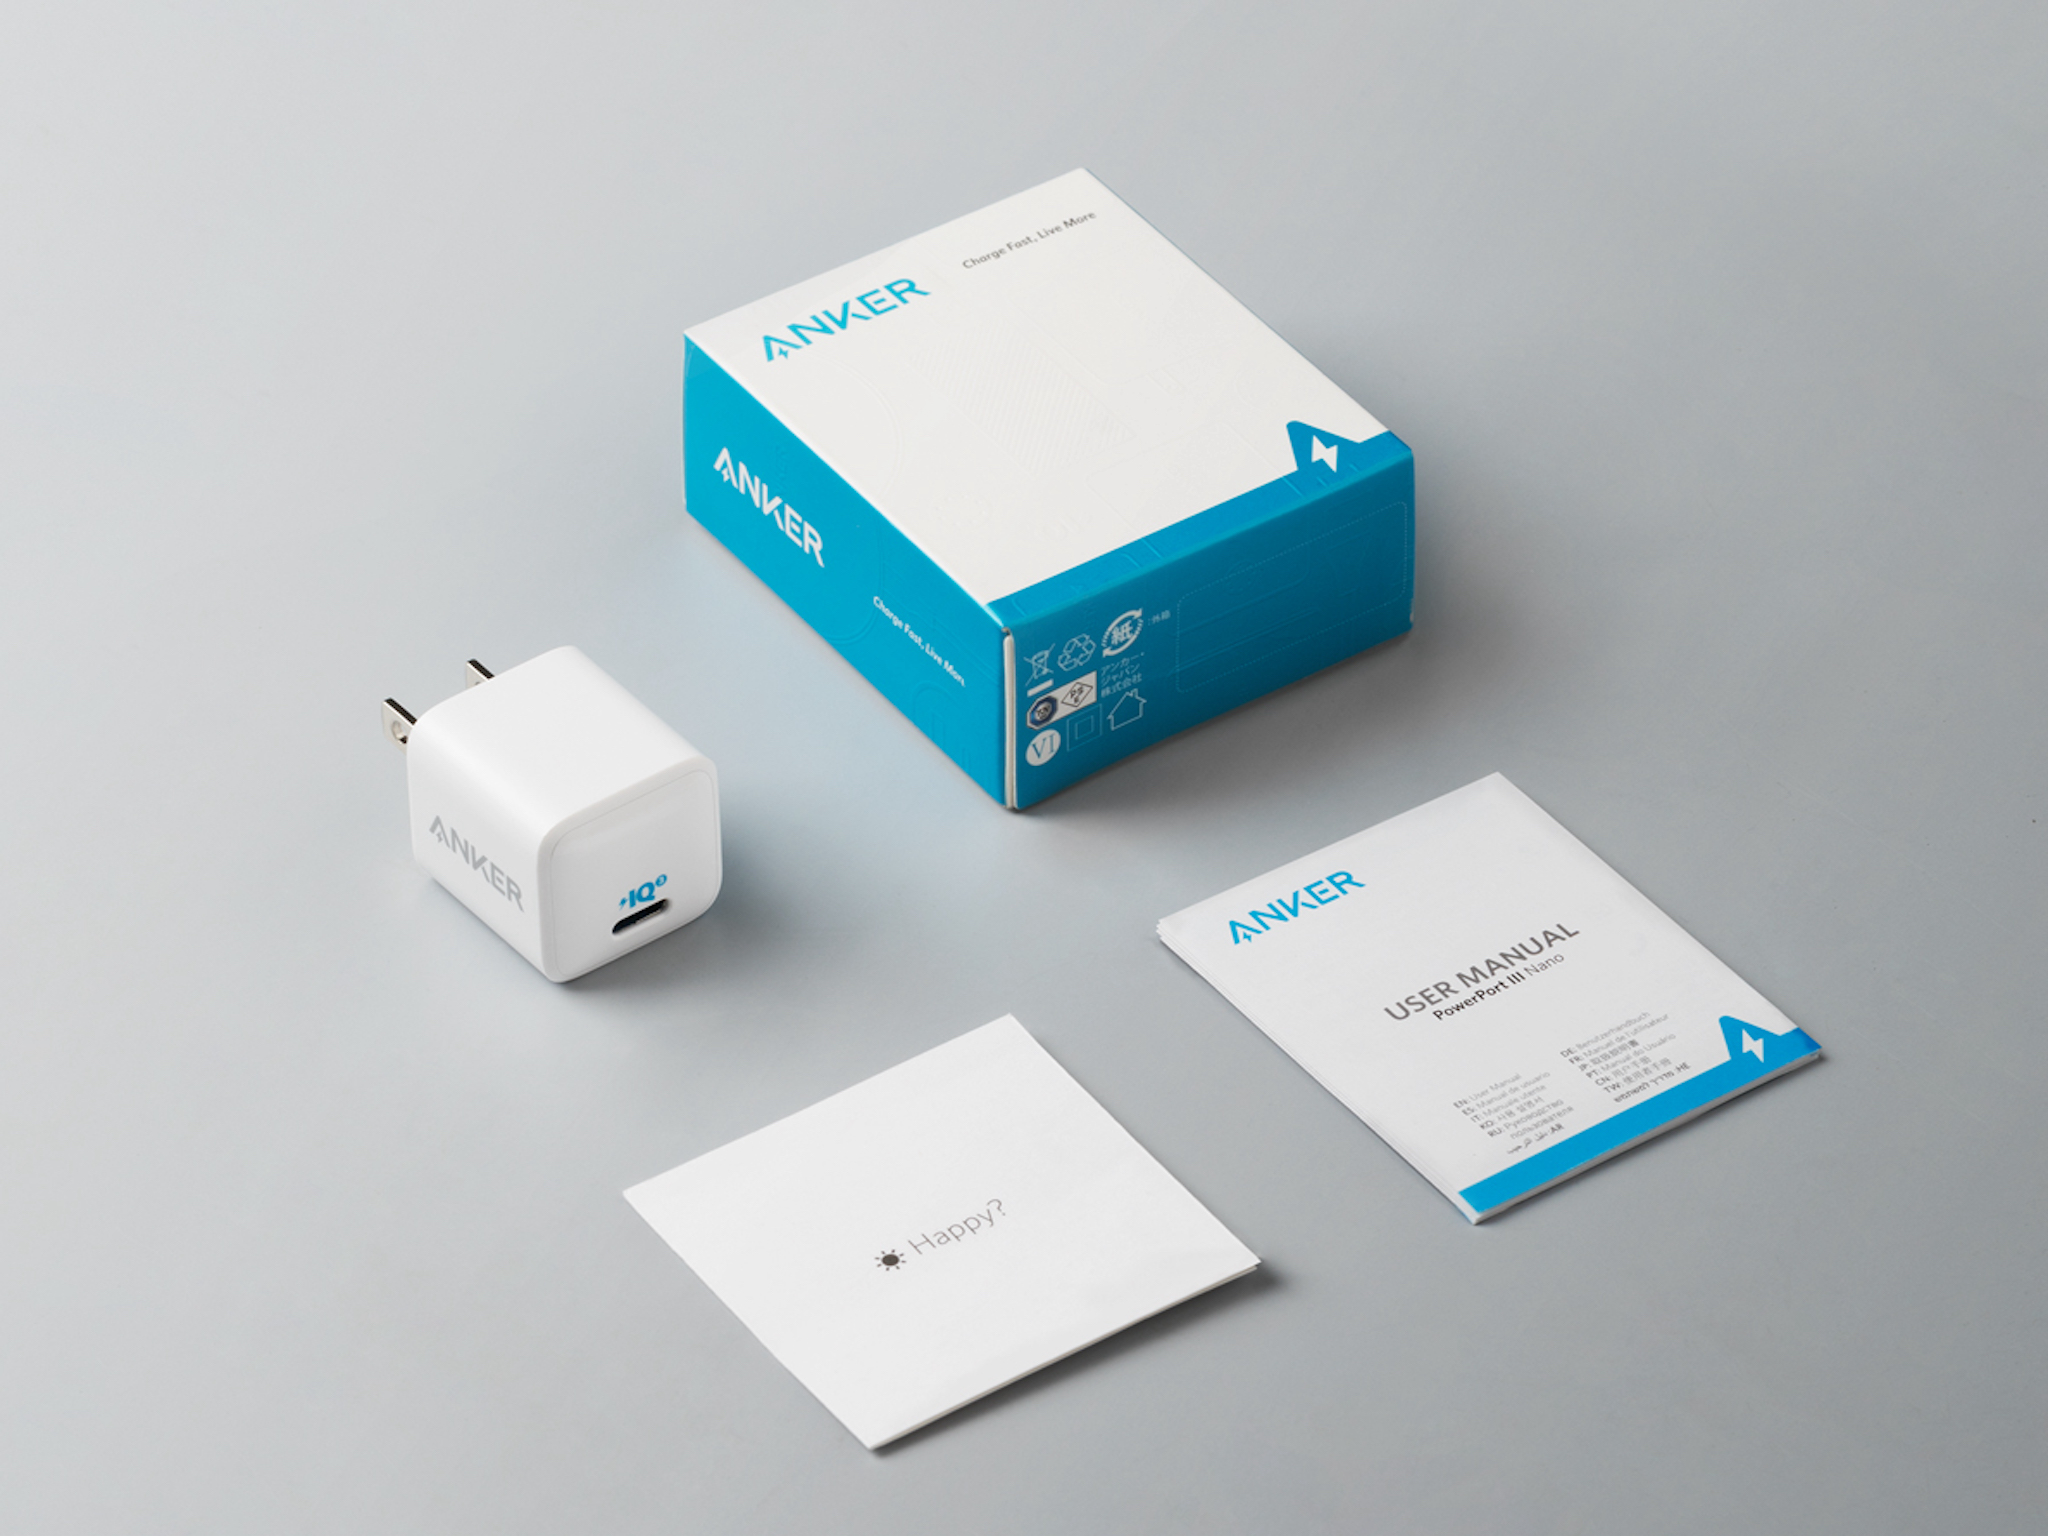 anker-charger-box-contents.jpg